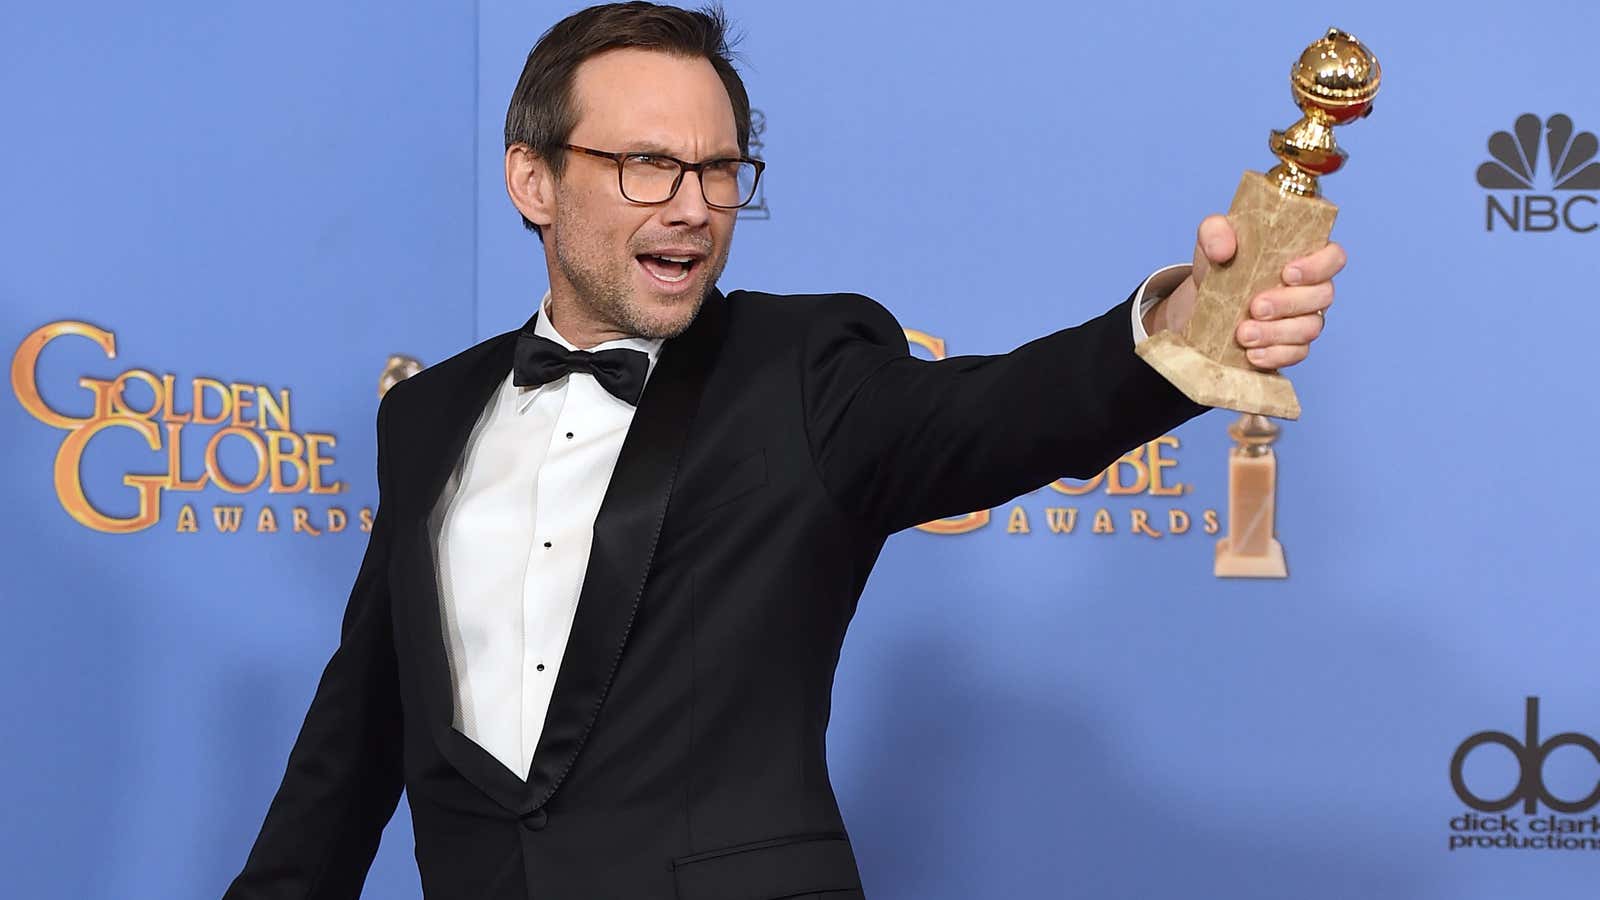 Christian Slater wins a Golden Globe for his supporting role in USA Network’s hacker drama, “Mr. Robot.”